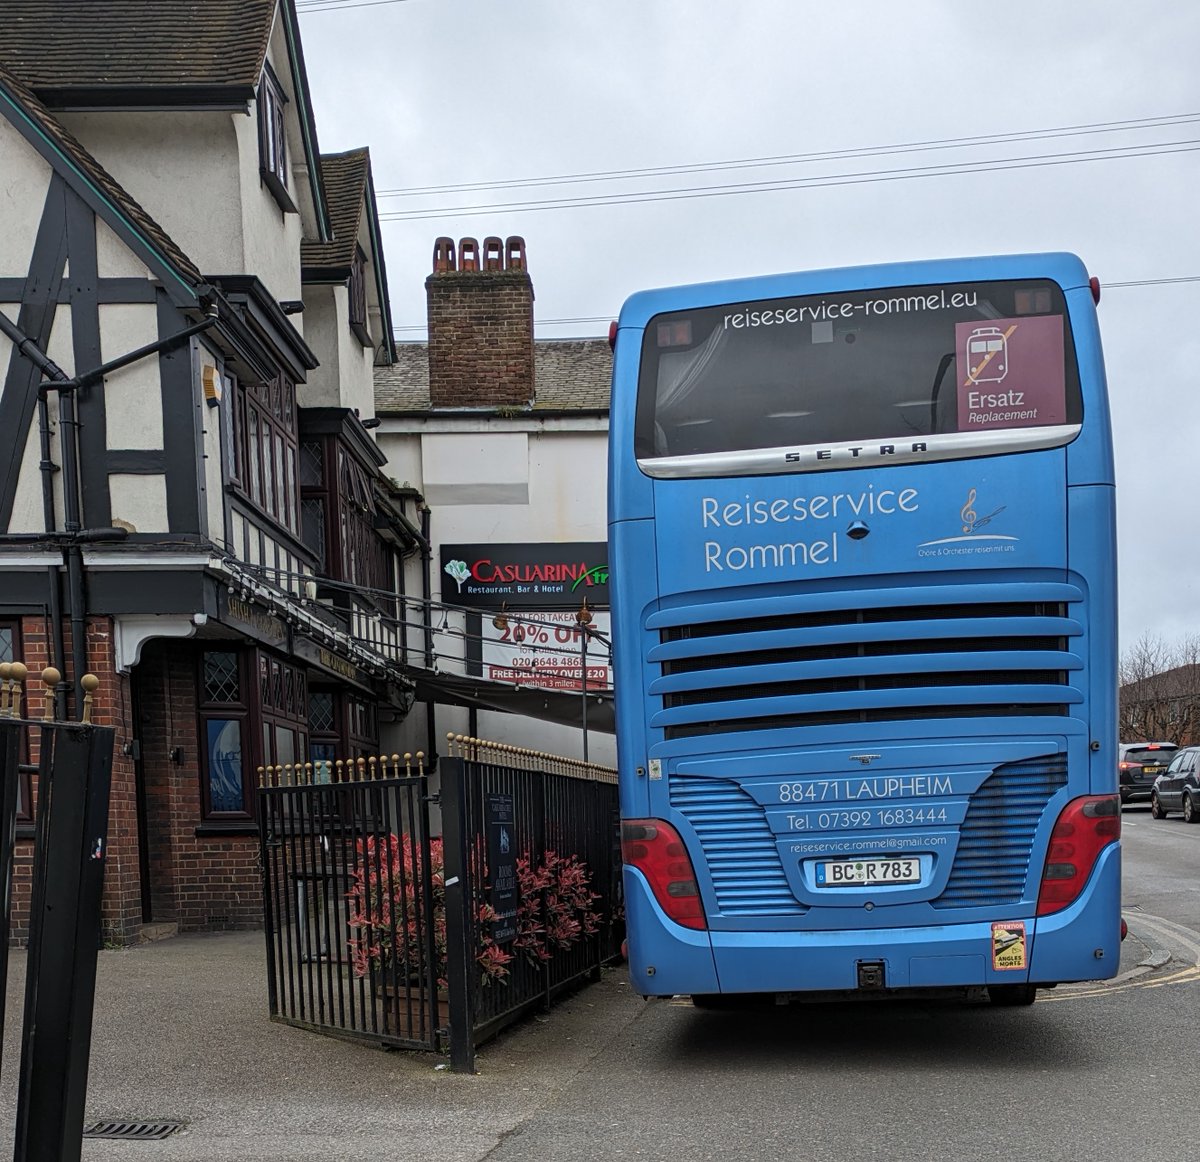 Rommel's tour bus blocking the pavement outside the Crown pub (Casuarina hotel) next to the old Mitcham station building. (Police were in attendance as I walked past.) @MitchamSociety